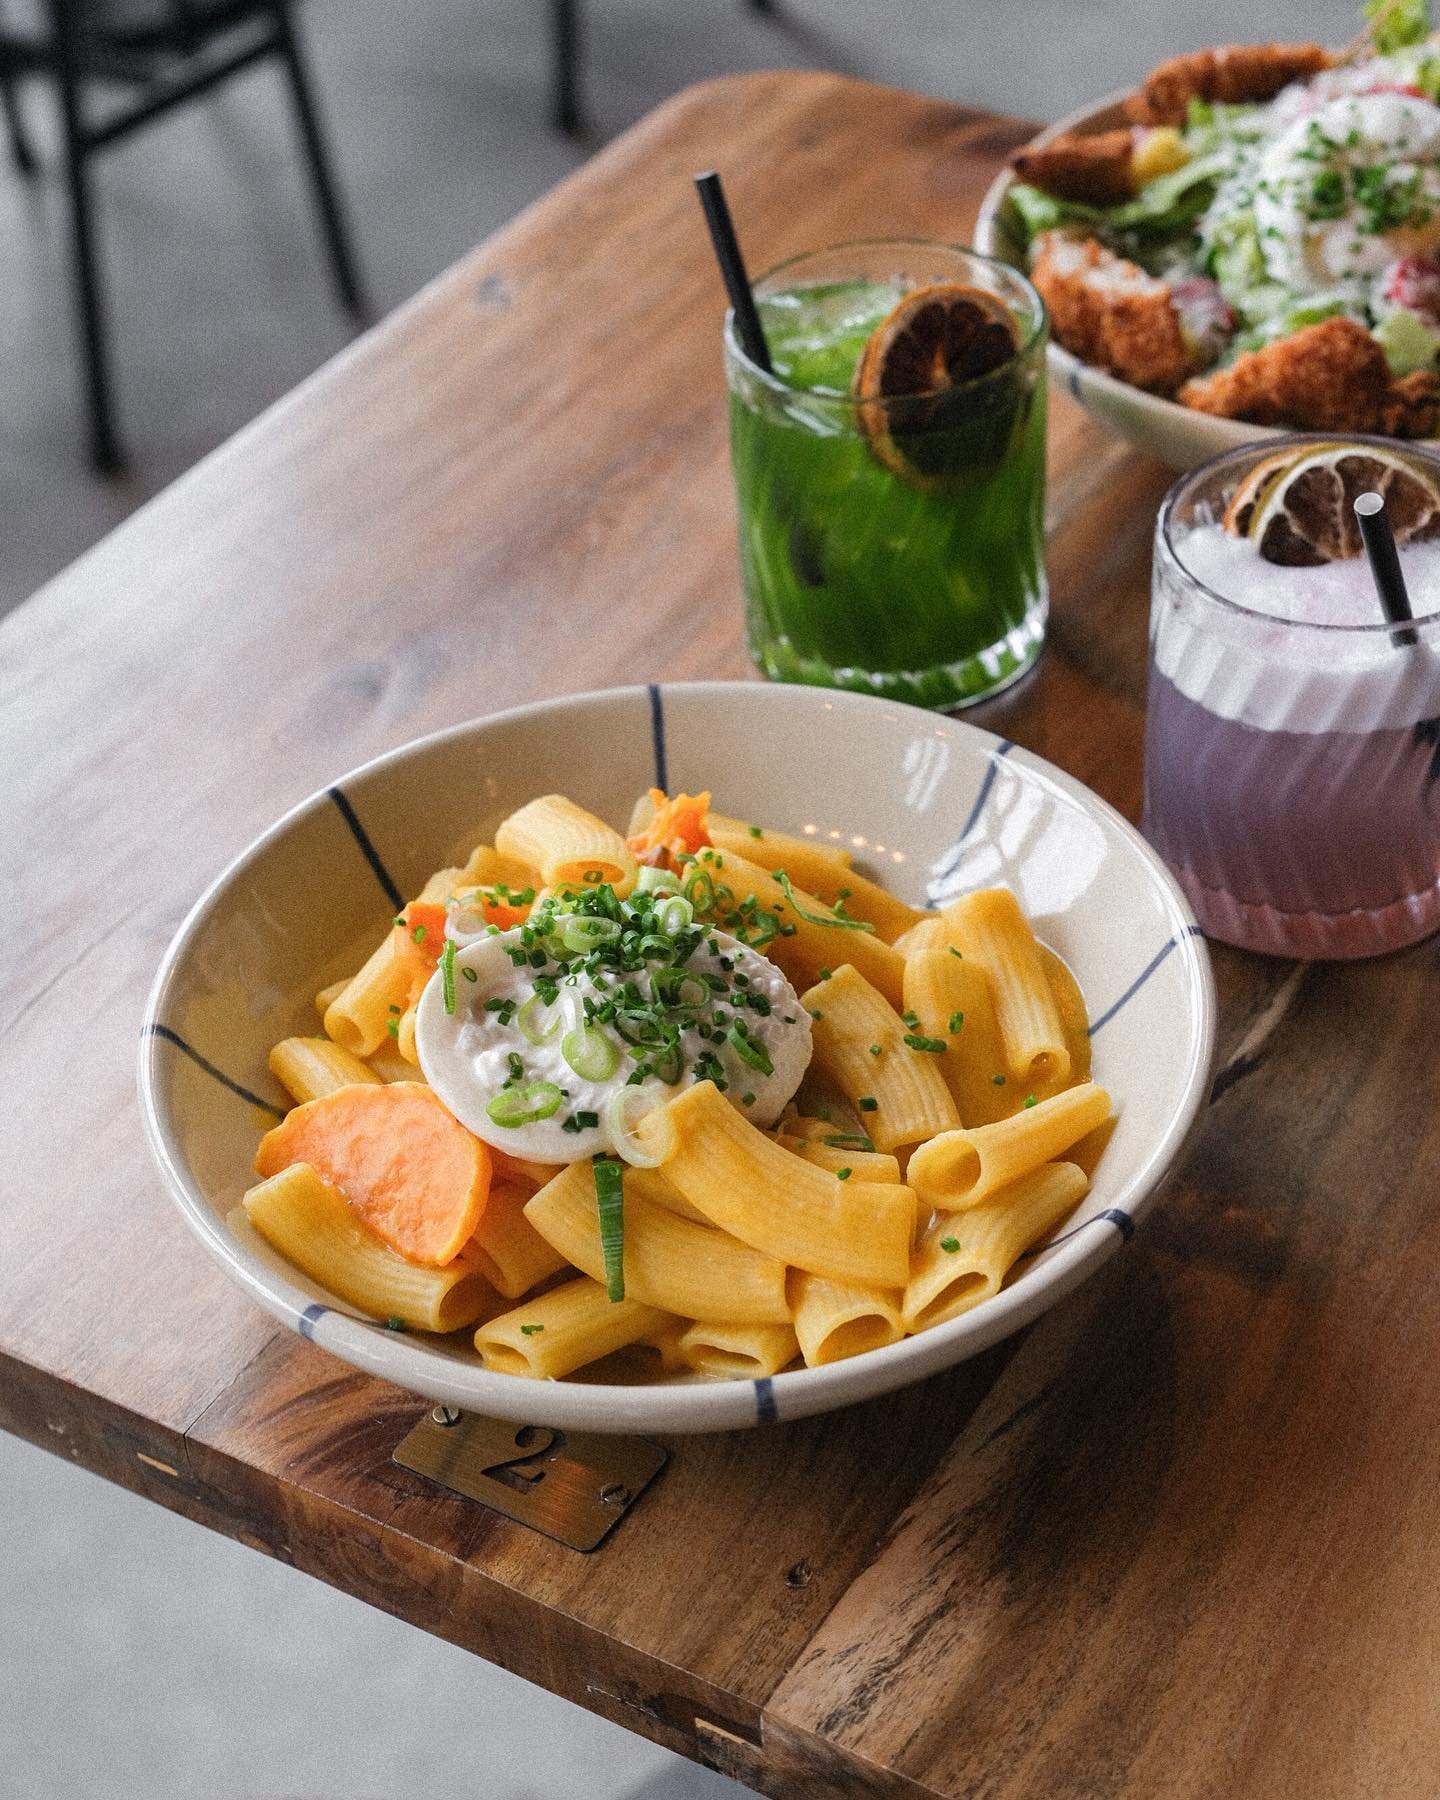 BUTTERNUT &amp; SAGA PASTA 🤌 🔥

The perfect lunch is waiting for you!
Served ever day from 12pm till 2.45pm.

See ya📍 Grand Canal - Quai des p&eacute;niches 44B - 1000 Bruxelles

#GrandCanalBrussels #UrbanEatery #FoodieBrussels #LunchBrussels #Lun